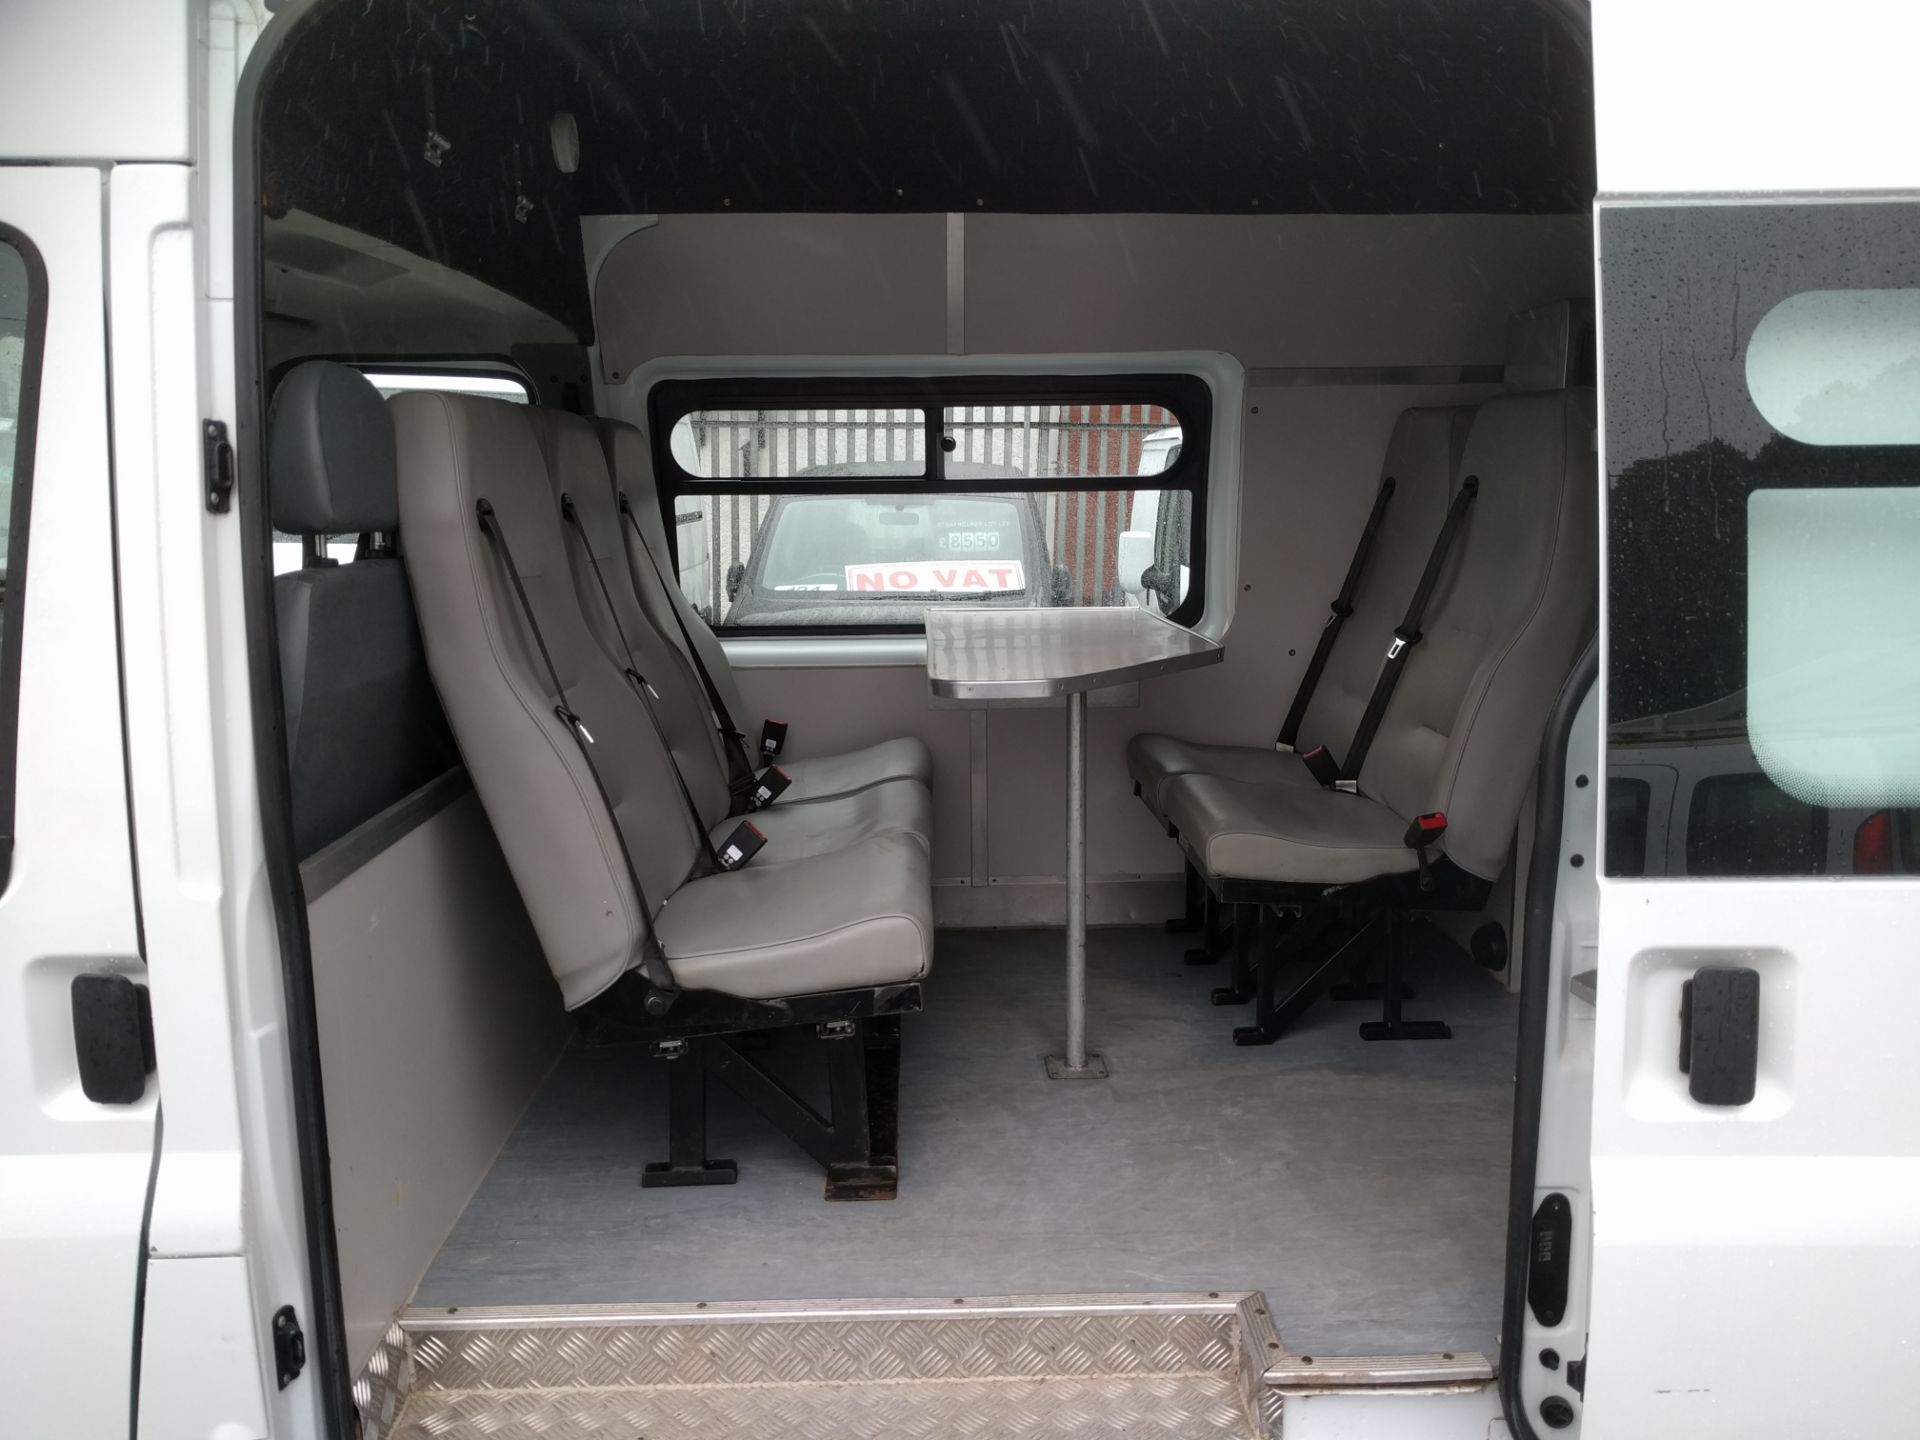 FORD TRANSIT 350 HIGH ROOF WELFARE UNIT - Image 7 of 15